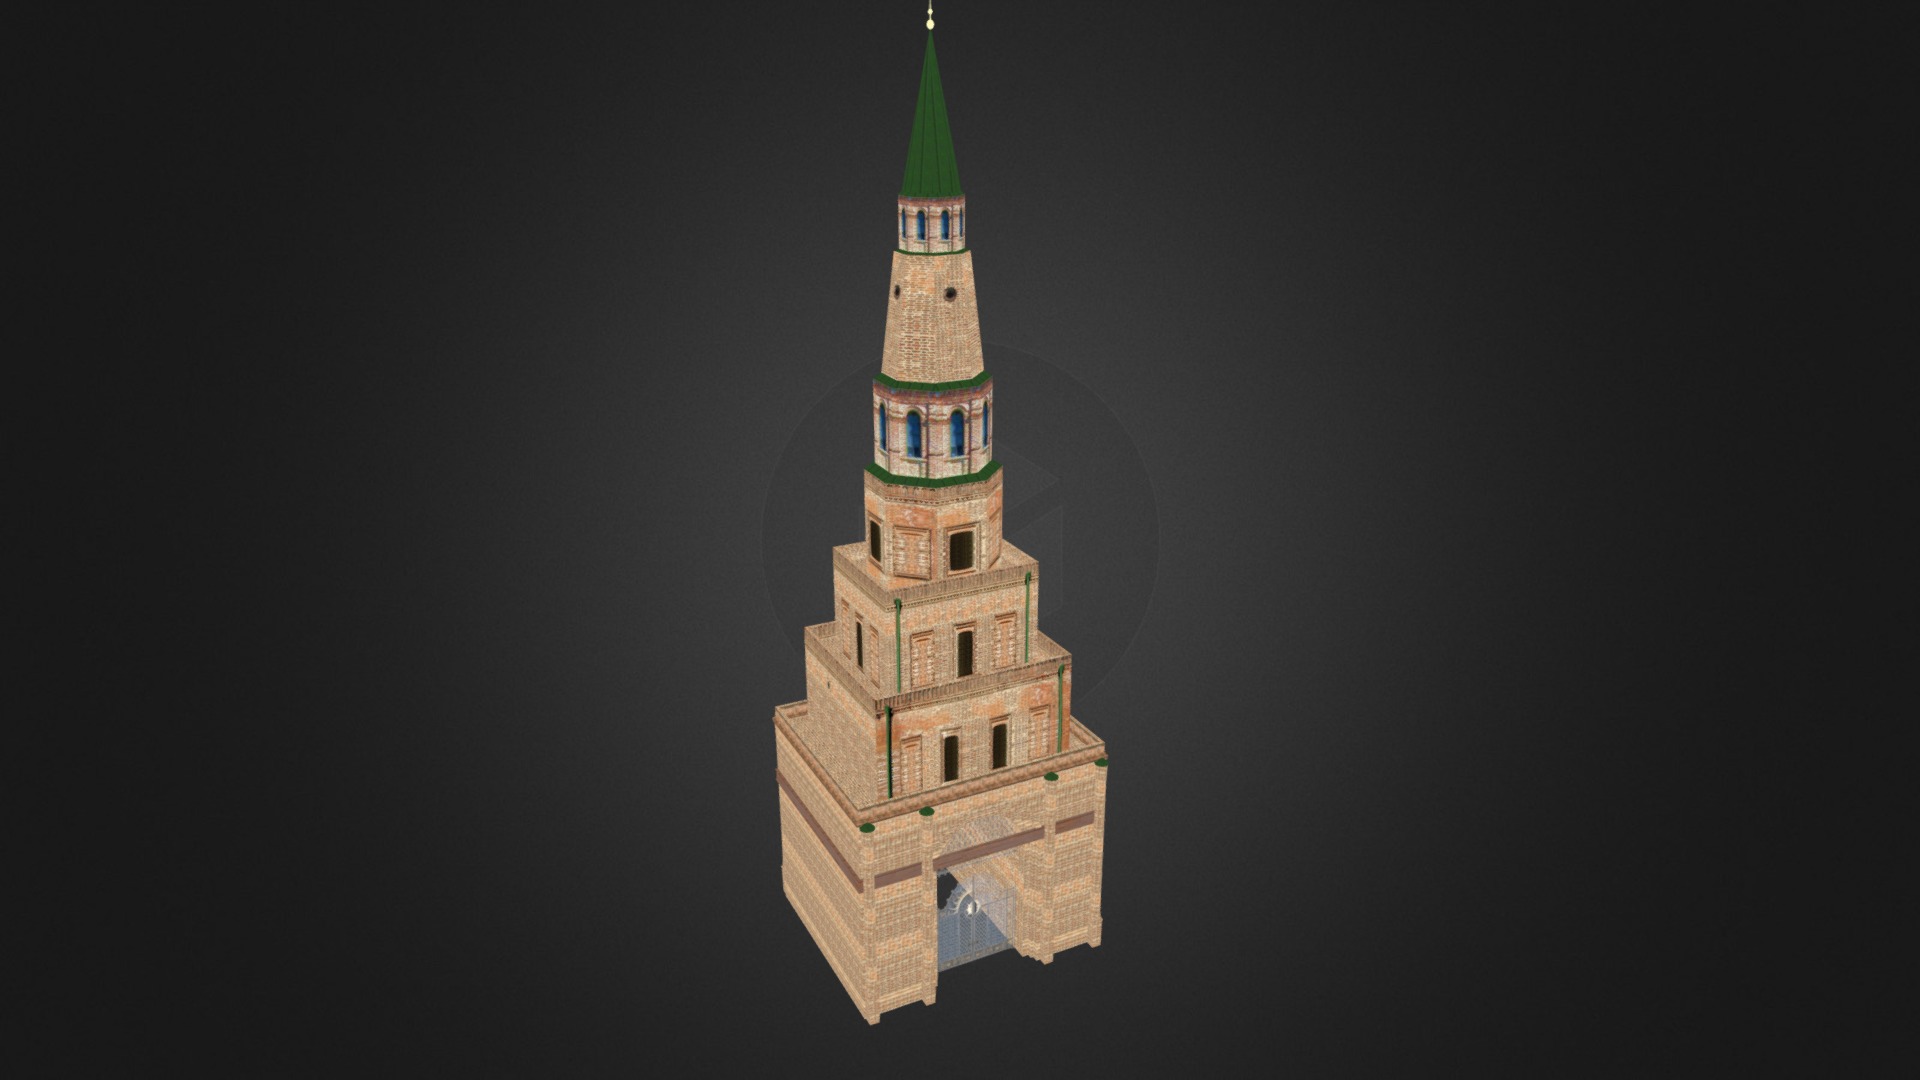 3D model Soyembika Tower - This is a 3D model of the Soyembika Tower. The 3D model is about a tall tower with a green top.